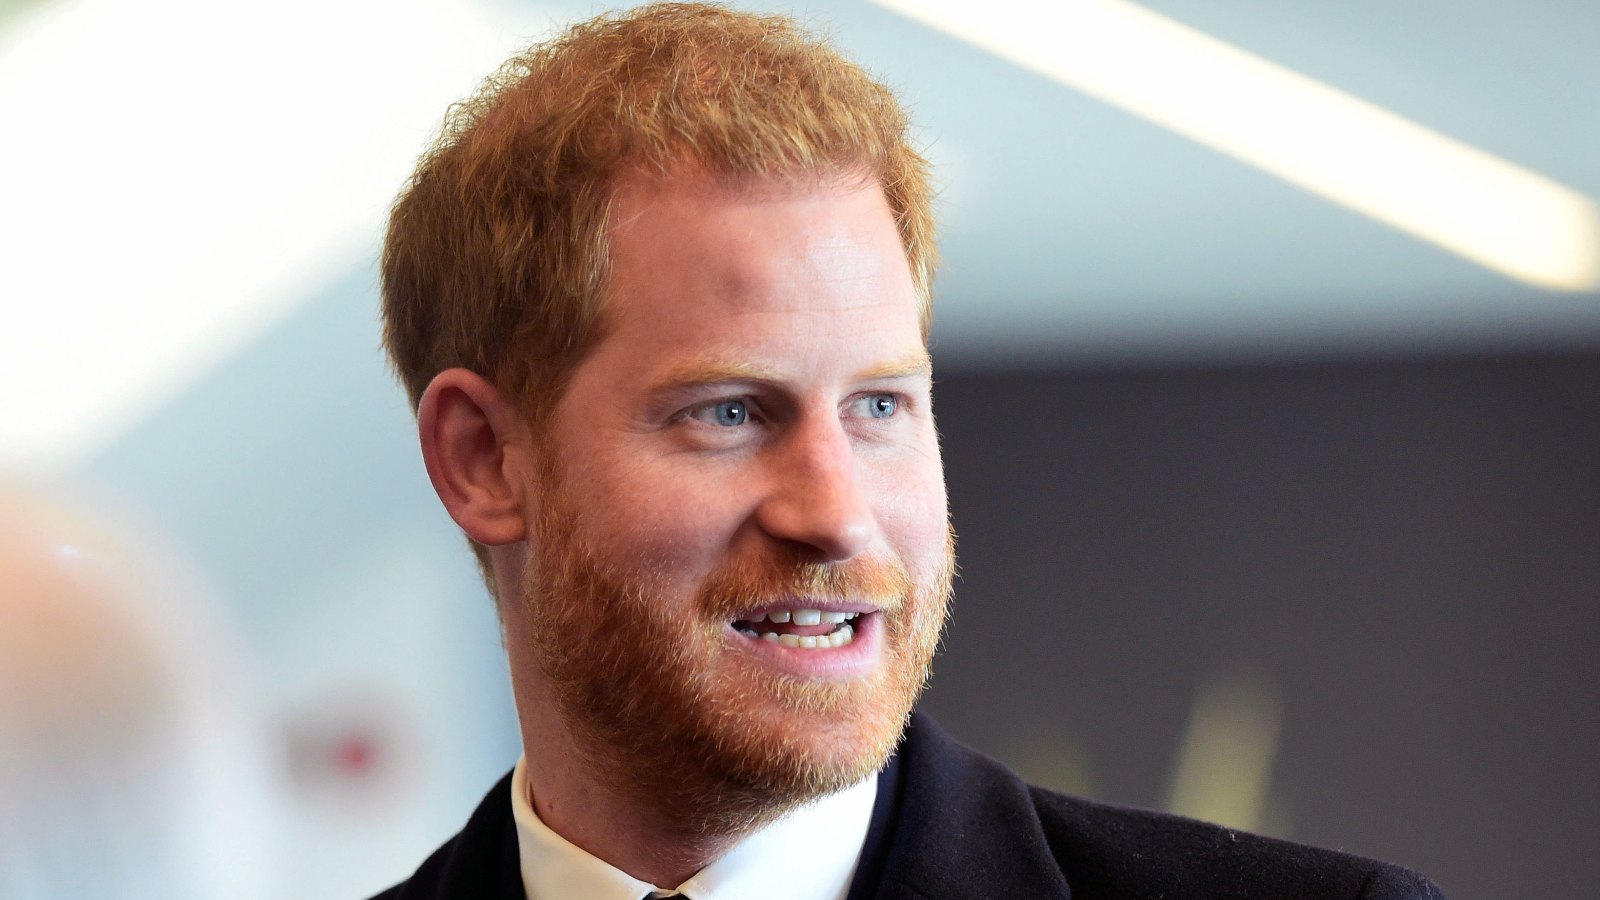 Prince Harry Racked Up a $38,000 Bill on Infamous Naked Las Vegas Trip